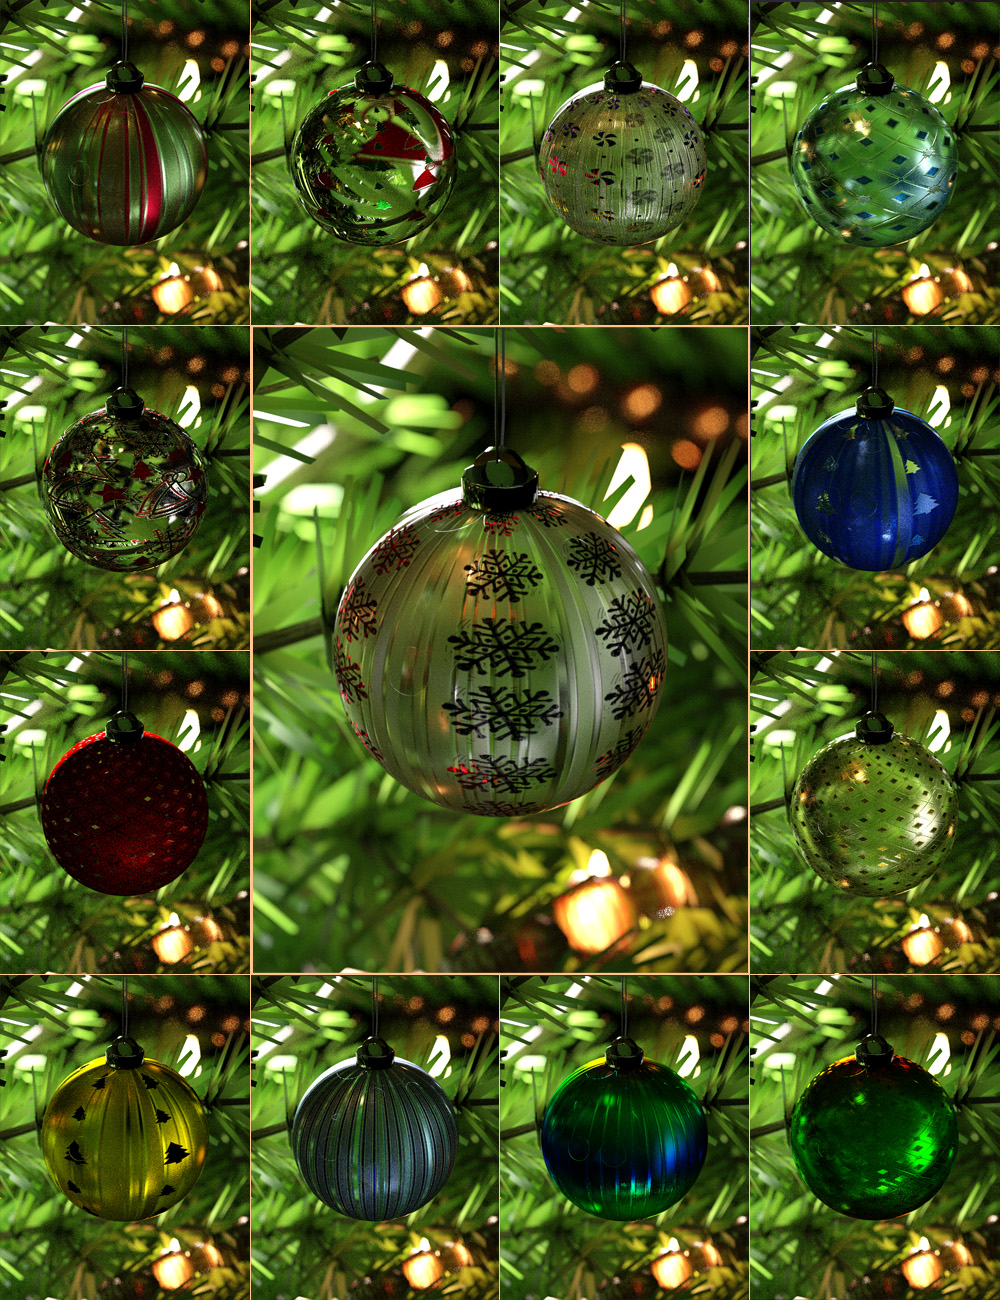 Xmas Glass Iray Shaders by: ForbiddenWhispers, 3D Models by Daz 3D